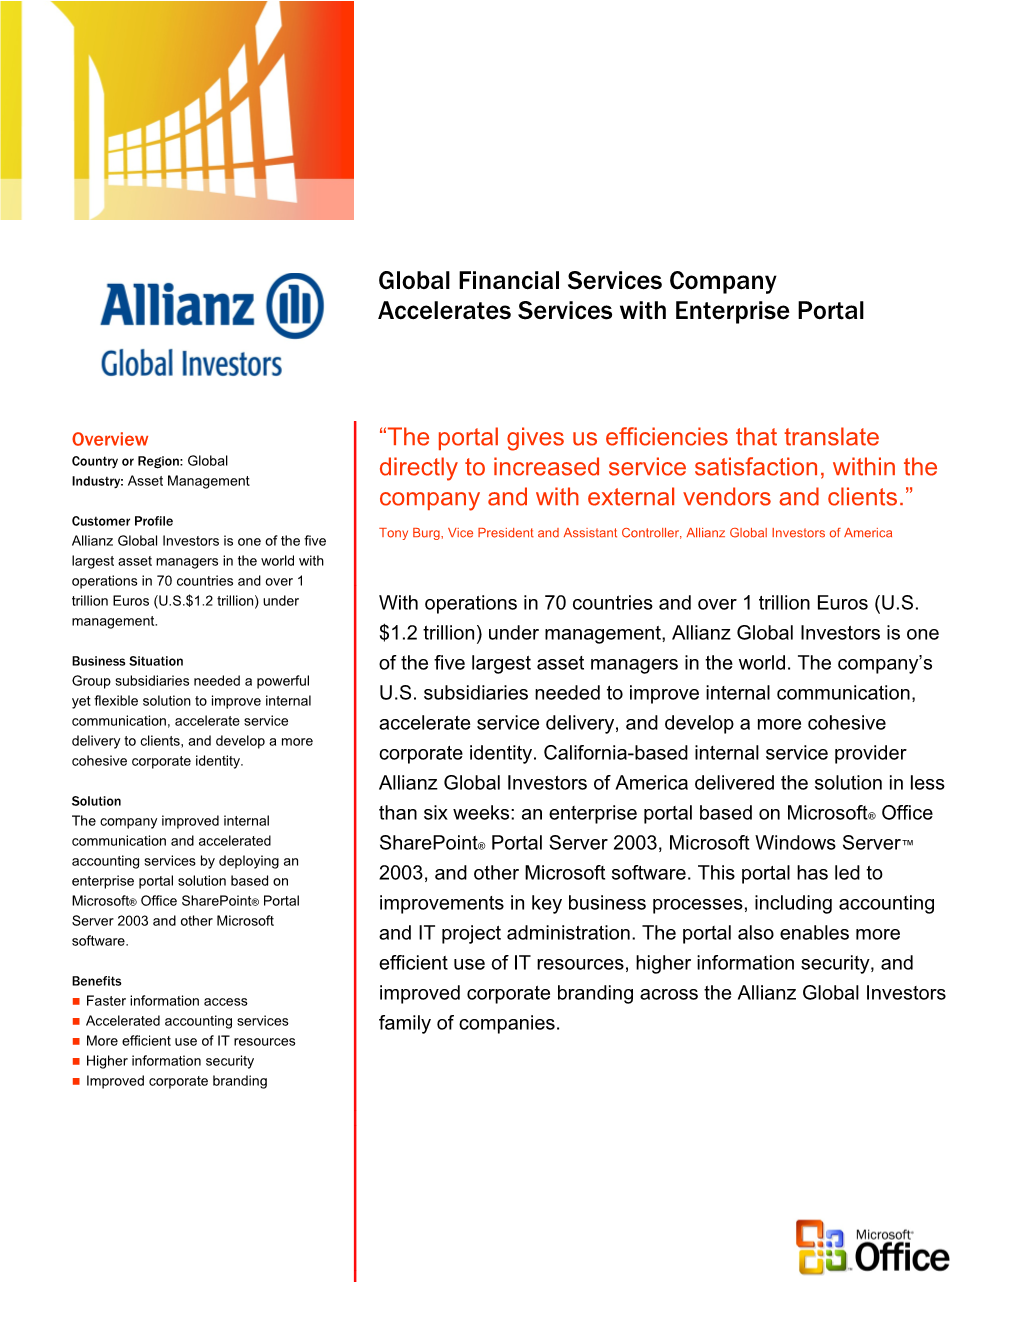 Global Financial Services Company Accelerates Services with Enterprise Portal